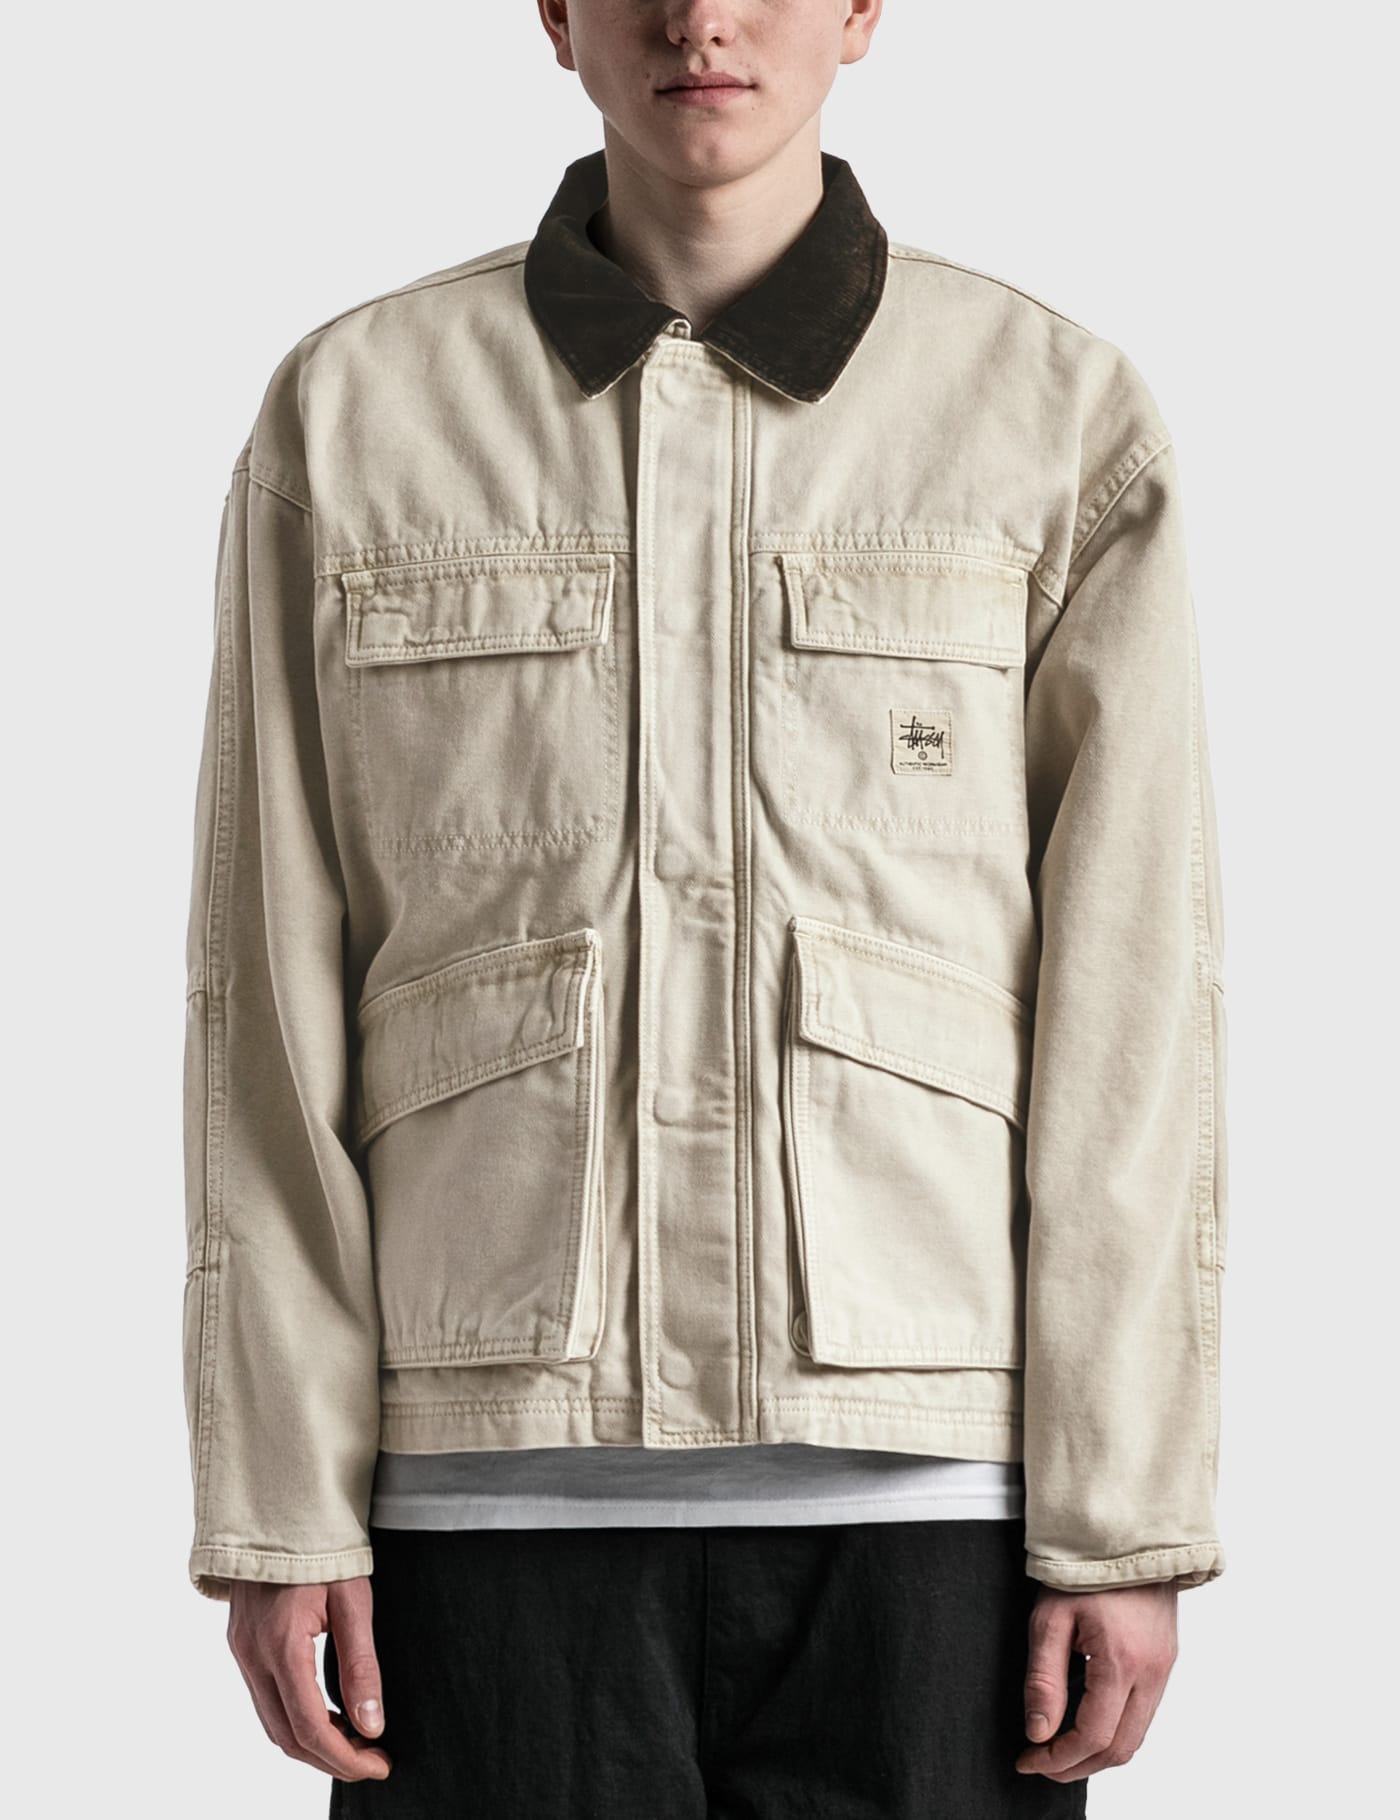 Stüssy   Washed Canvas Shop Jacket   HBX   Globally Curated